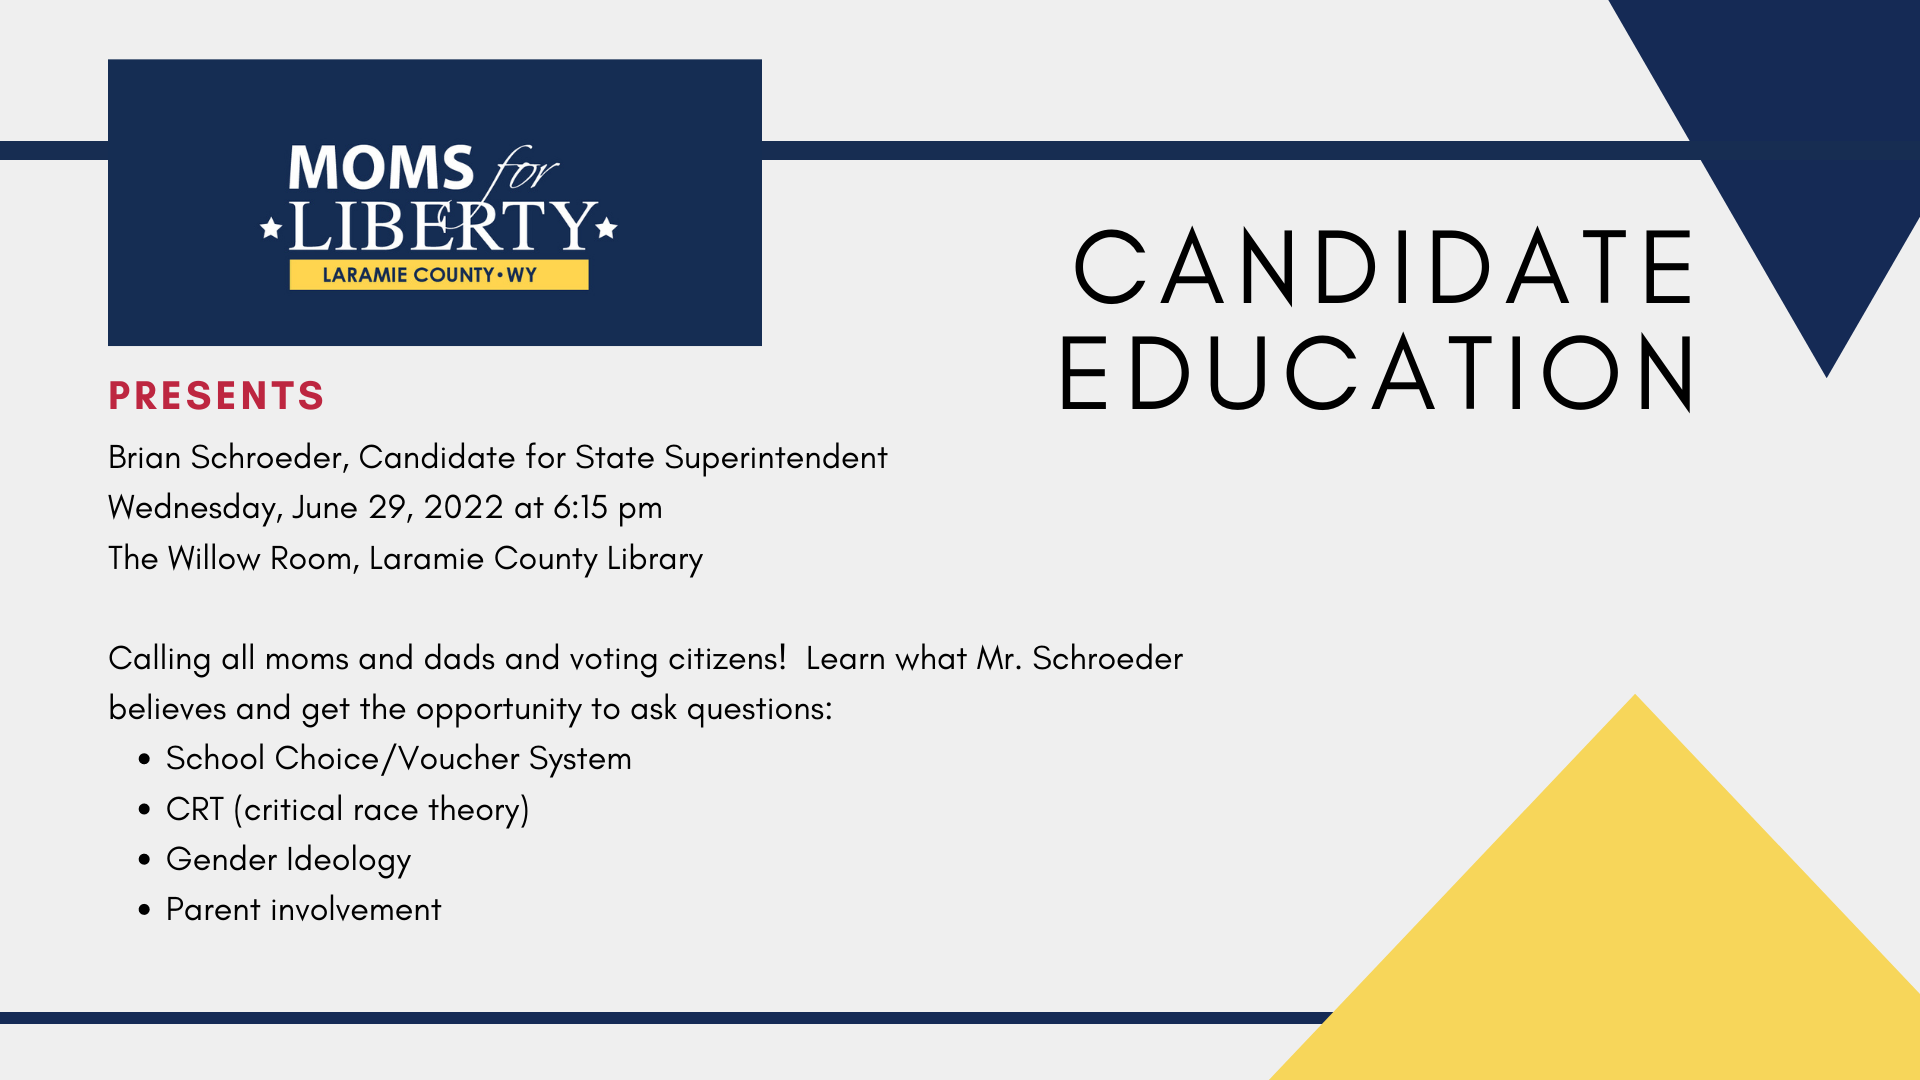 Learn About the Candidate: Brian Schroeder for State Superintendent